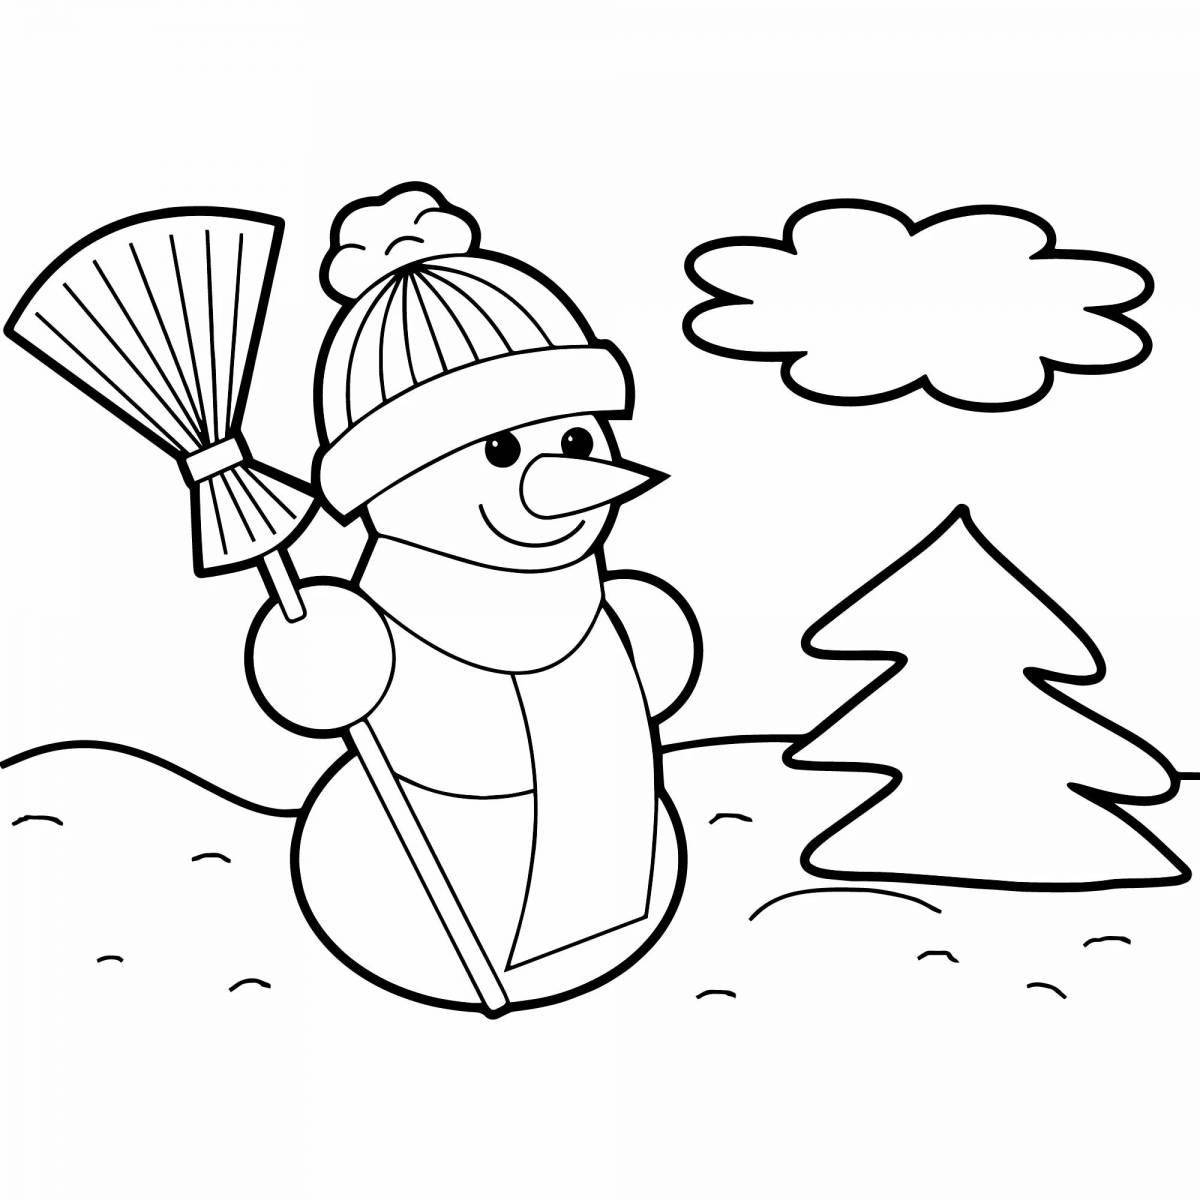 Cute coloring book snowman with a broom